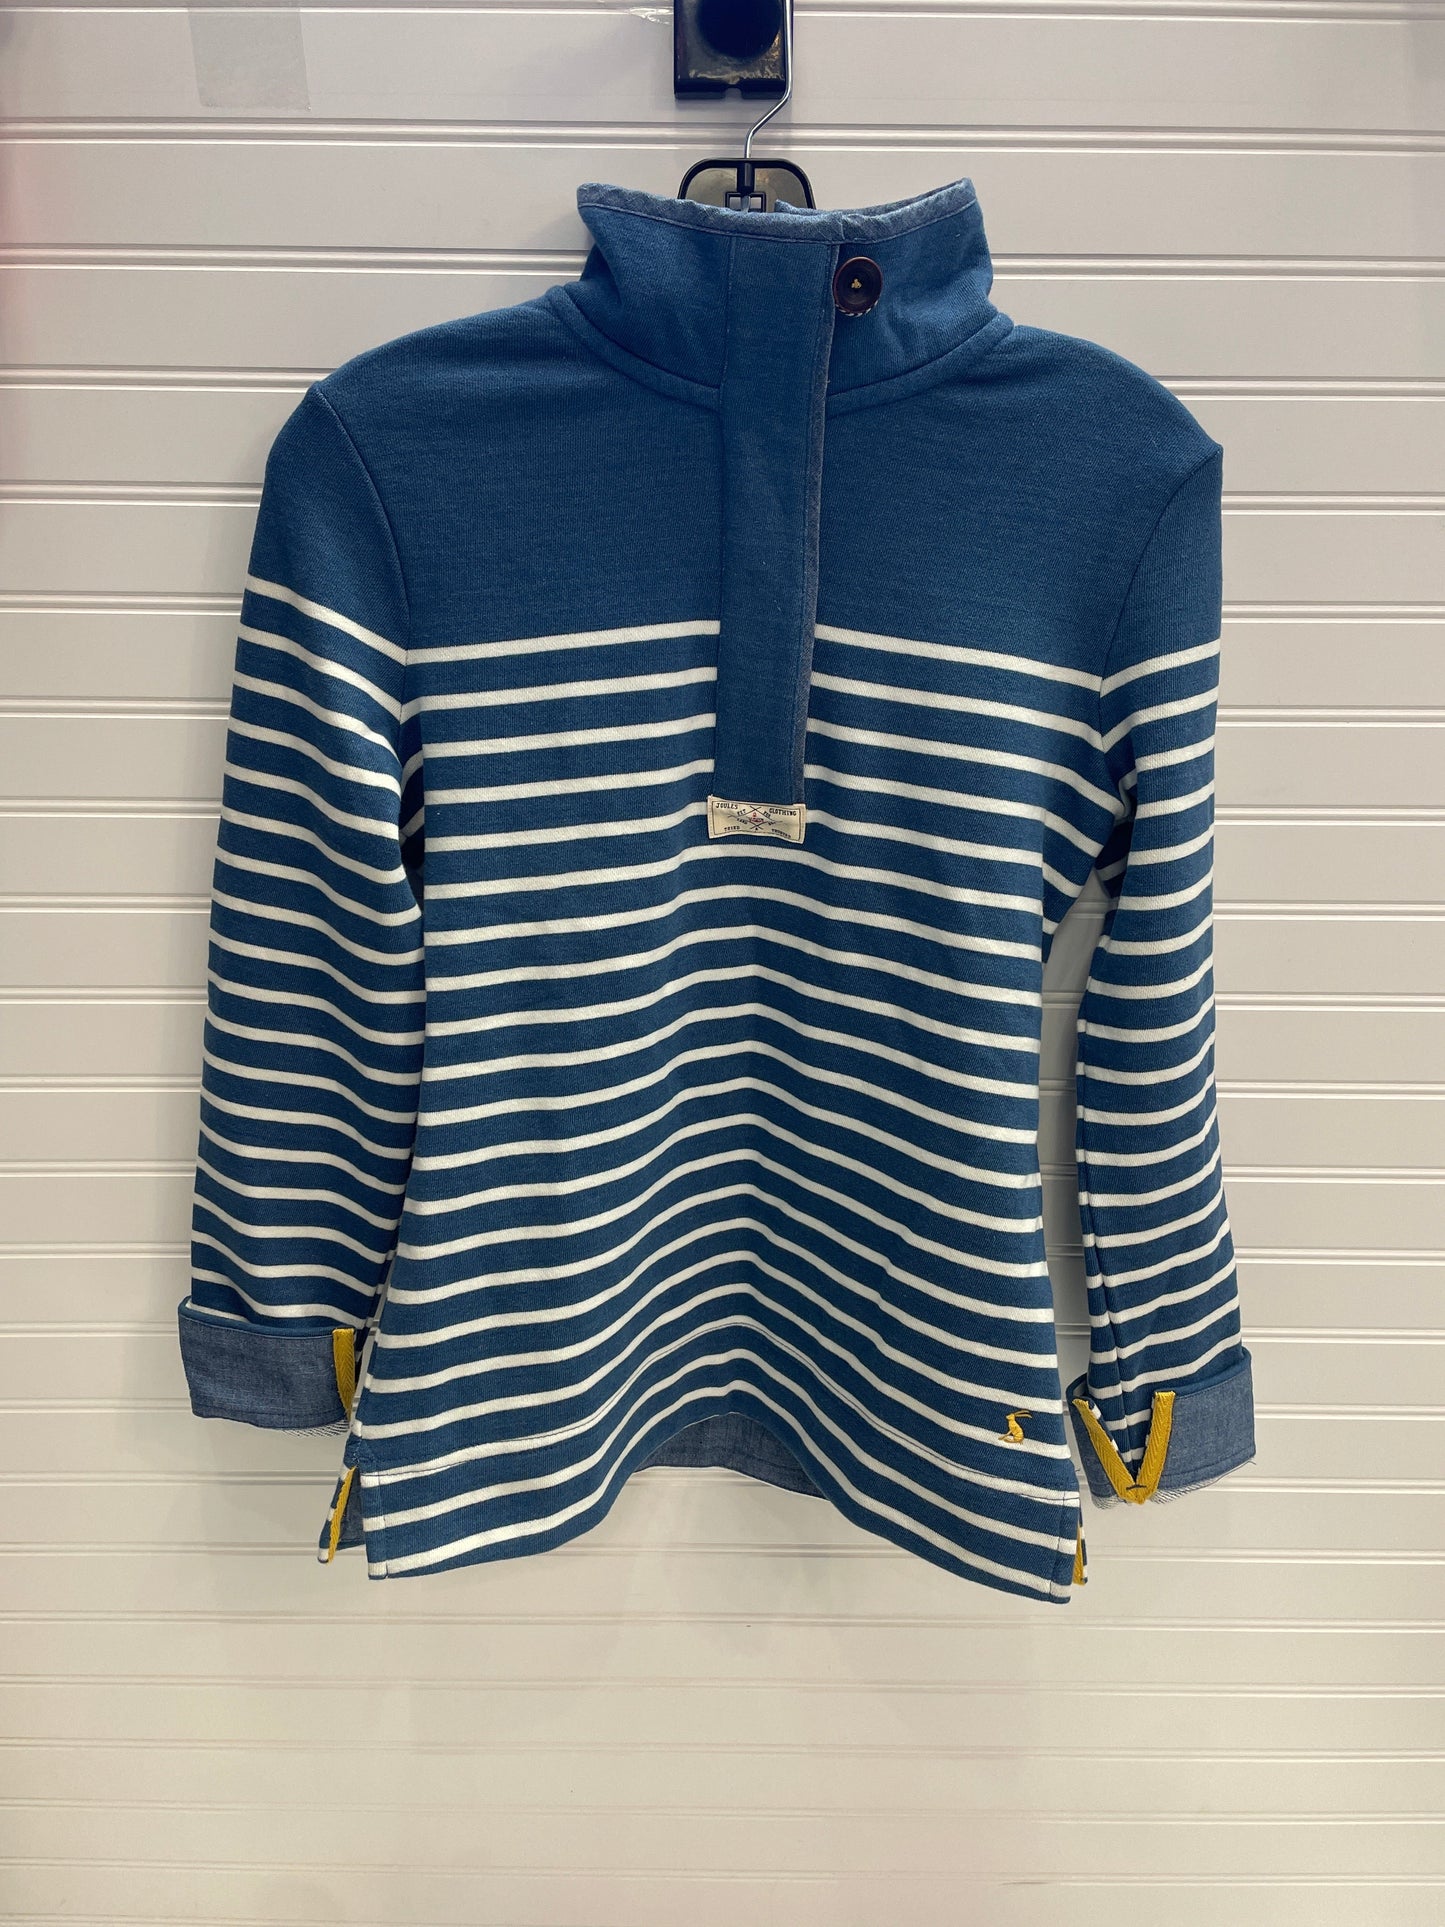 Blue & White Top Long Sleeve Joules, Size Xs